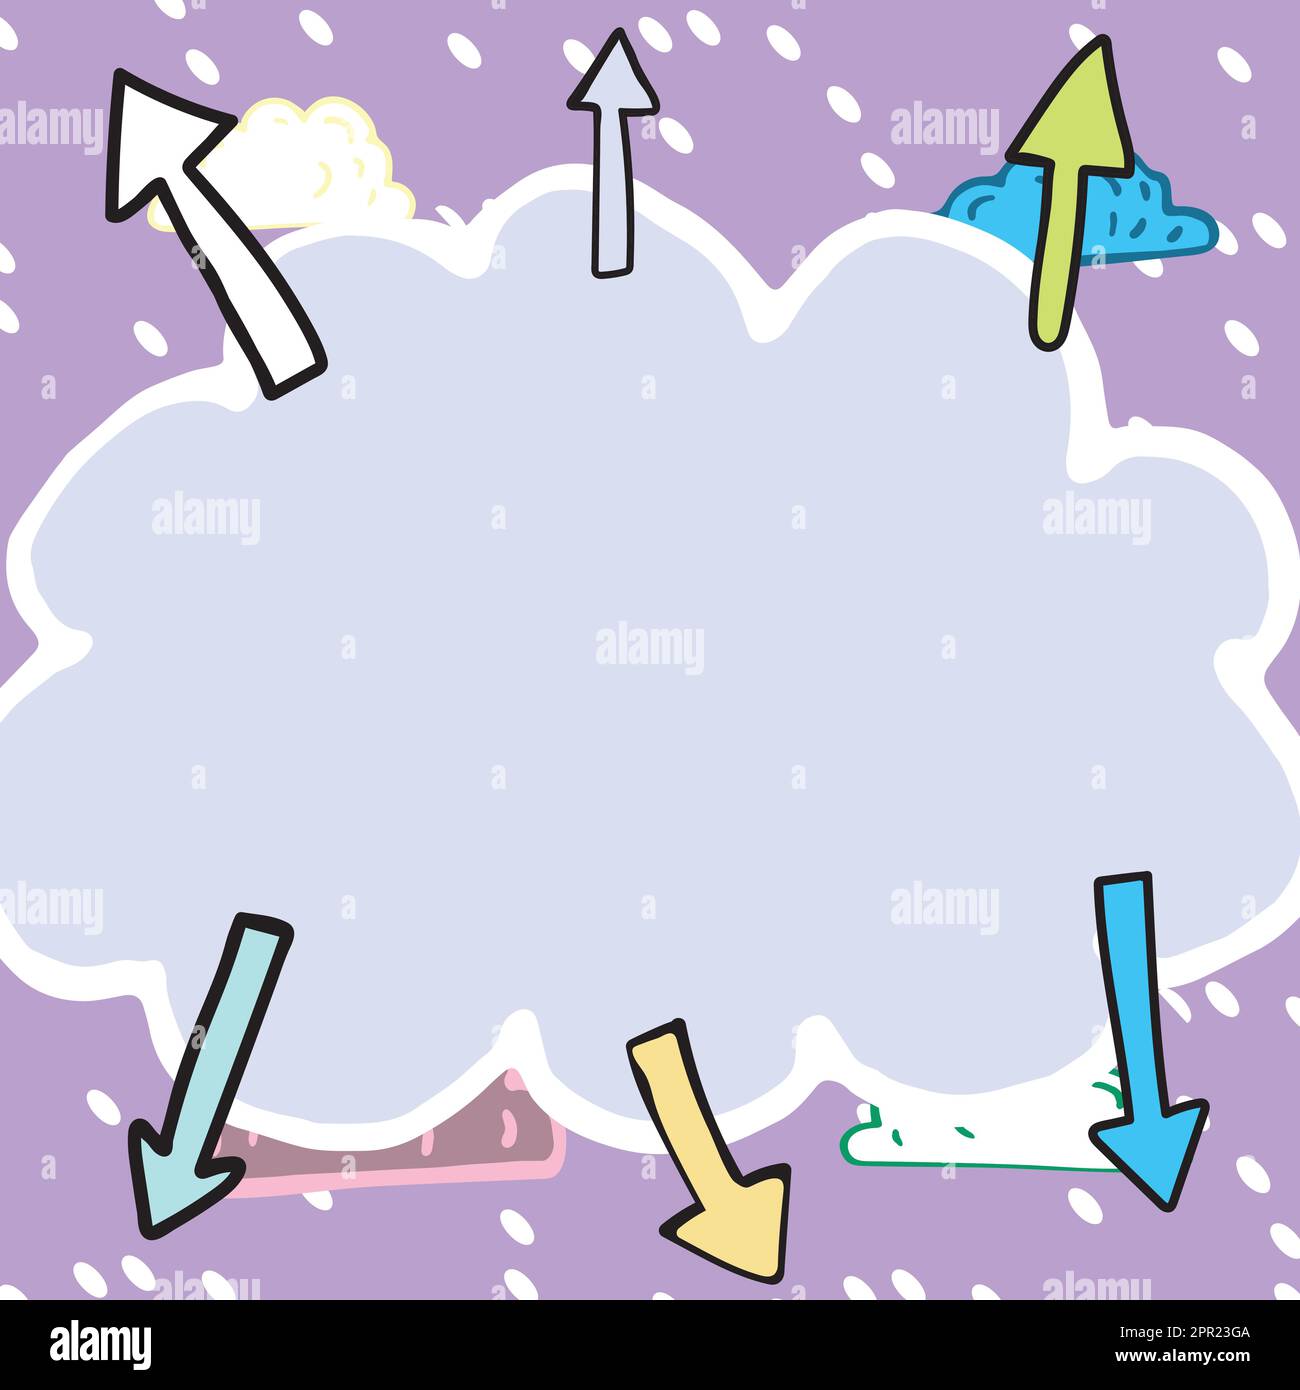 Important Messages Written In Shape Of Cloud With Arrows Around. Crutial Informations Presented In Cloudy Form With Snow In Background. Recent Ideas Diplayed. Stock Vector